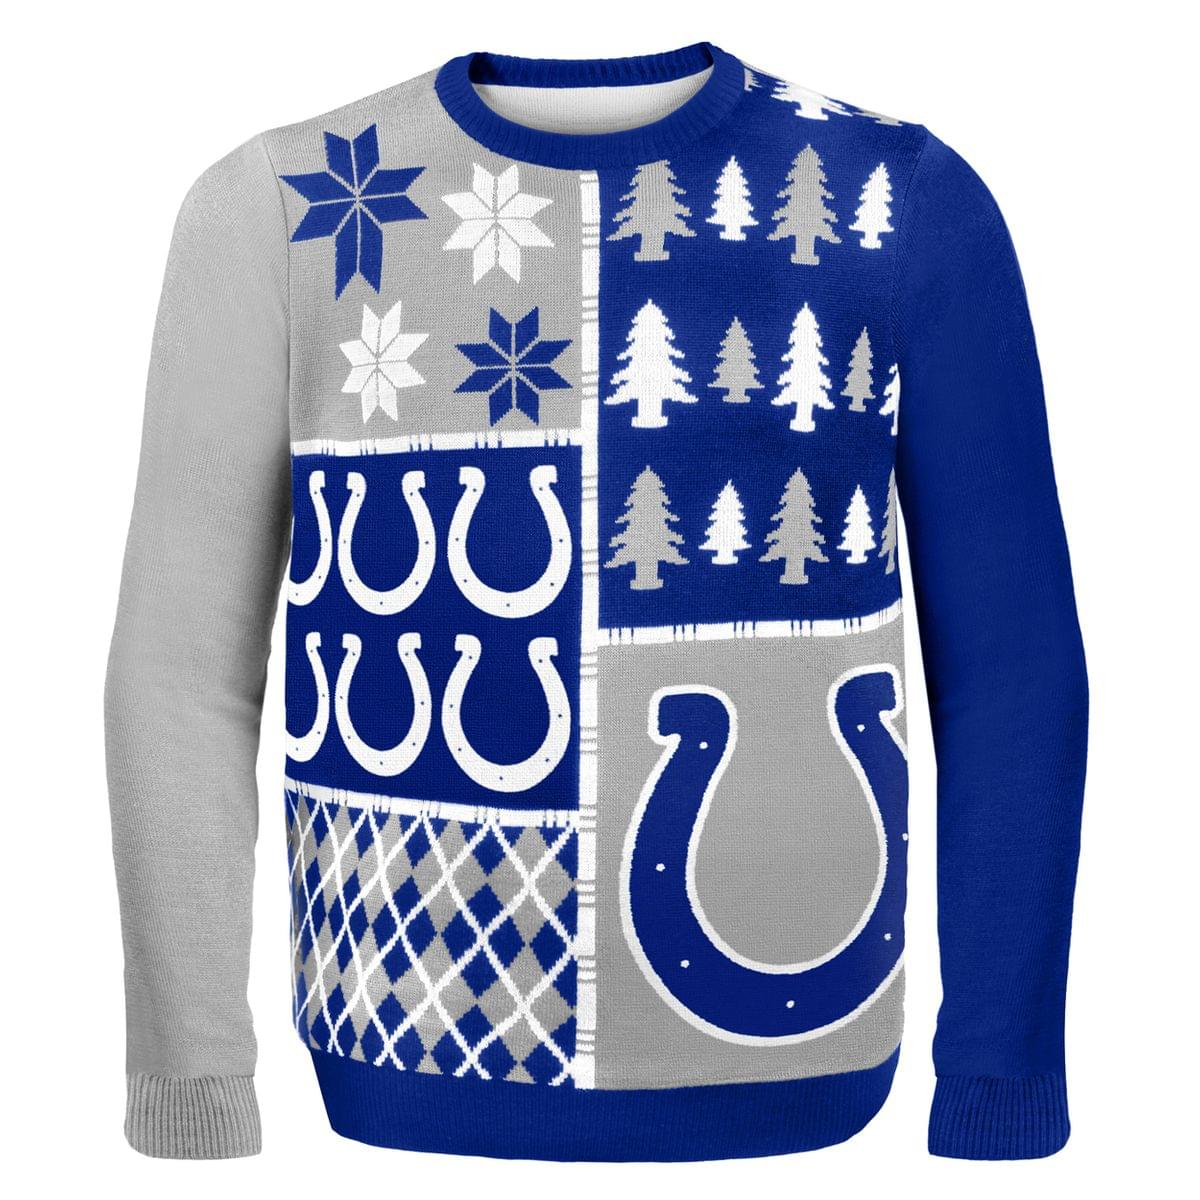 FOCO NFL Dallas Cowboys BUSY BLOCK Ugly Sweater, Large